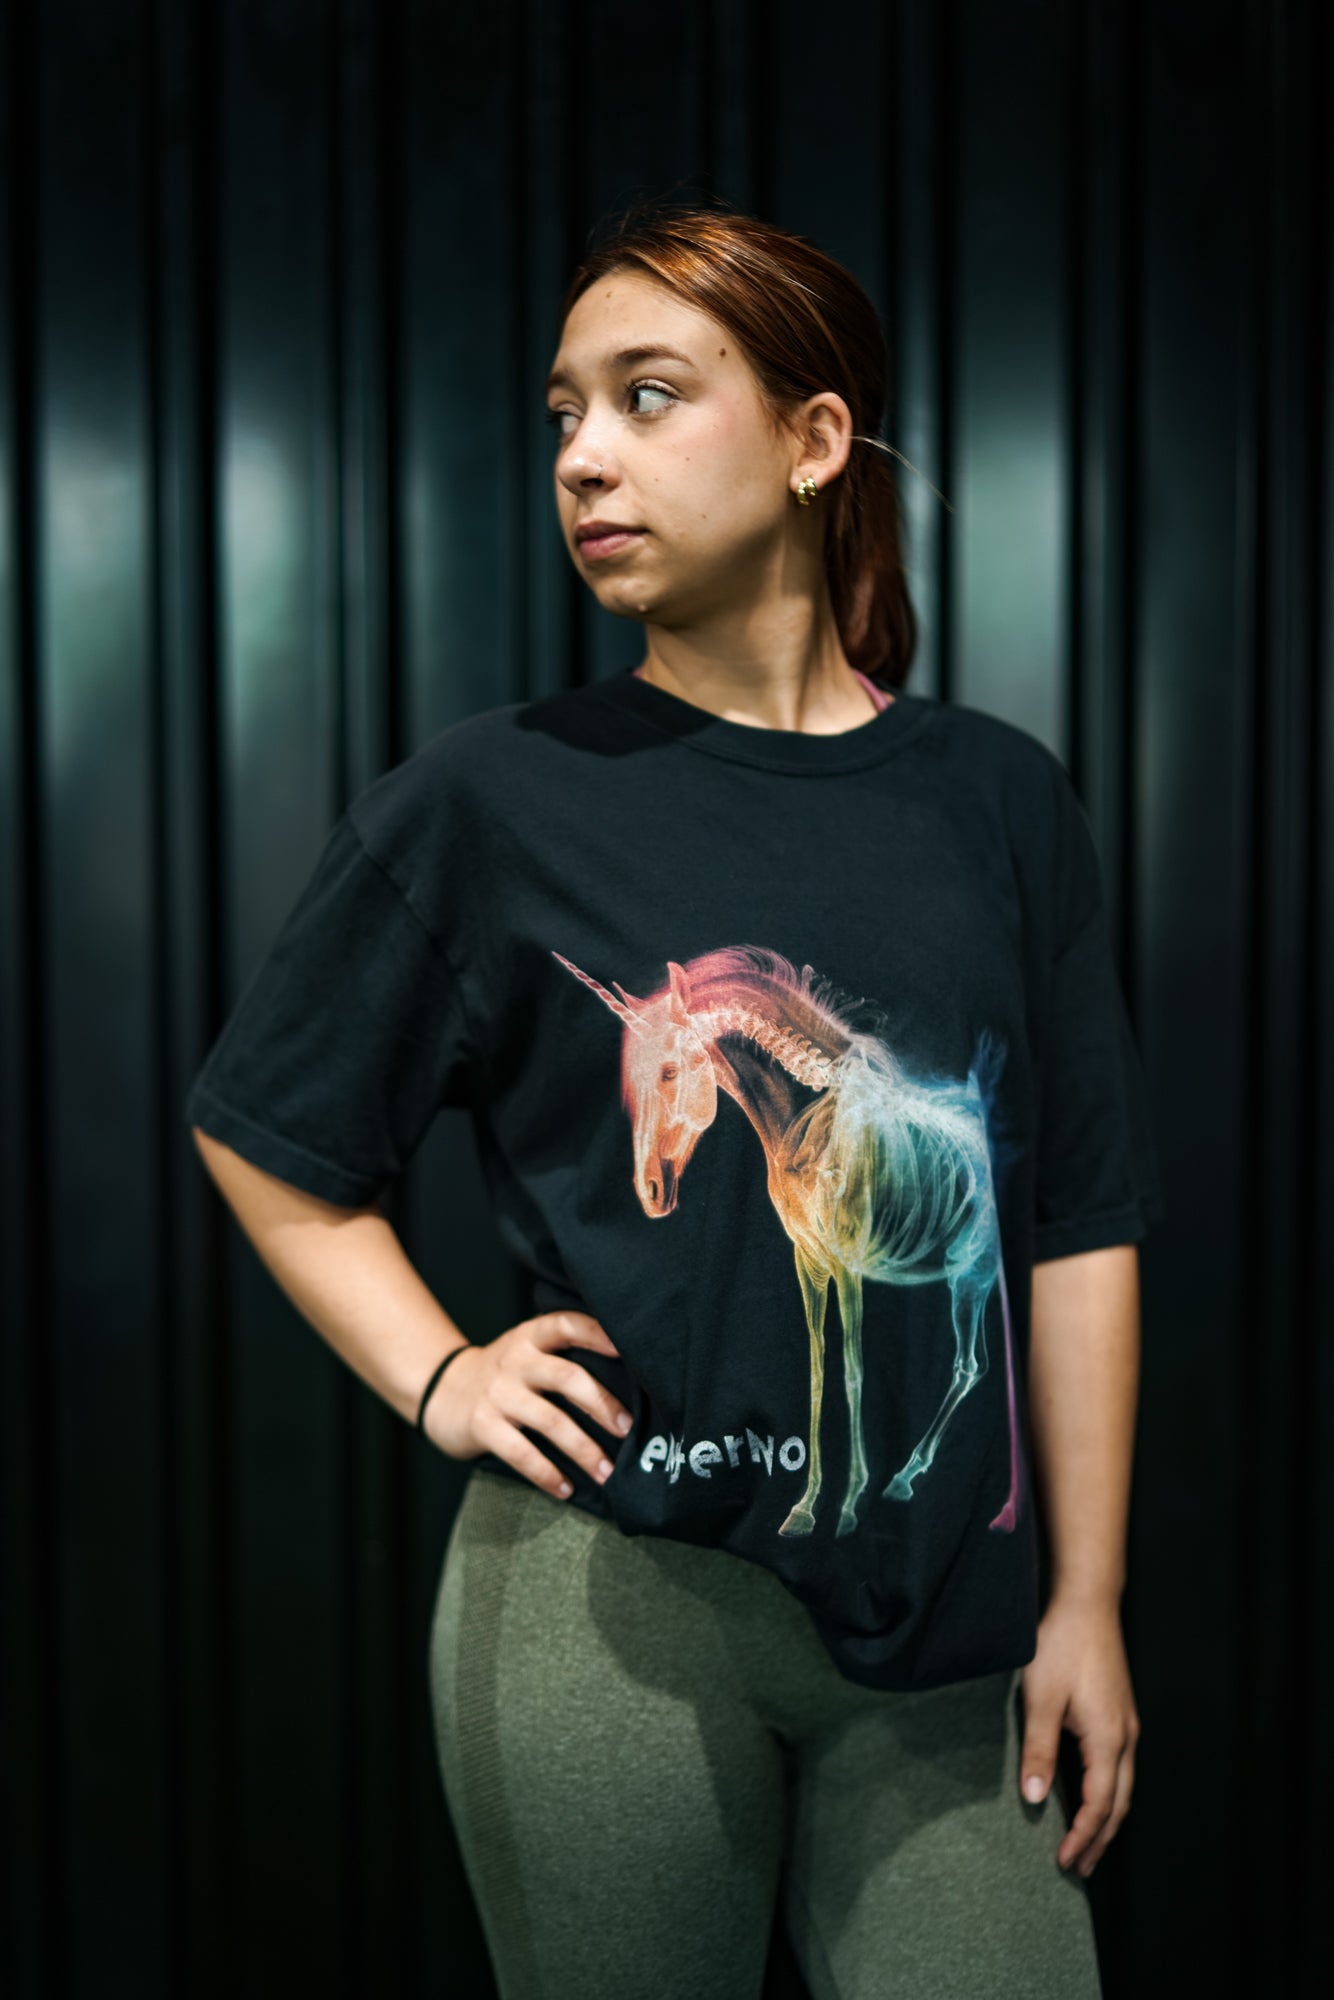 Enferno X-Ray Unicorn Tee in Black on model Madelyn.